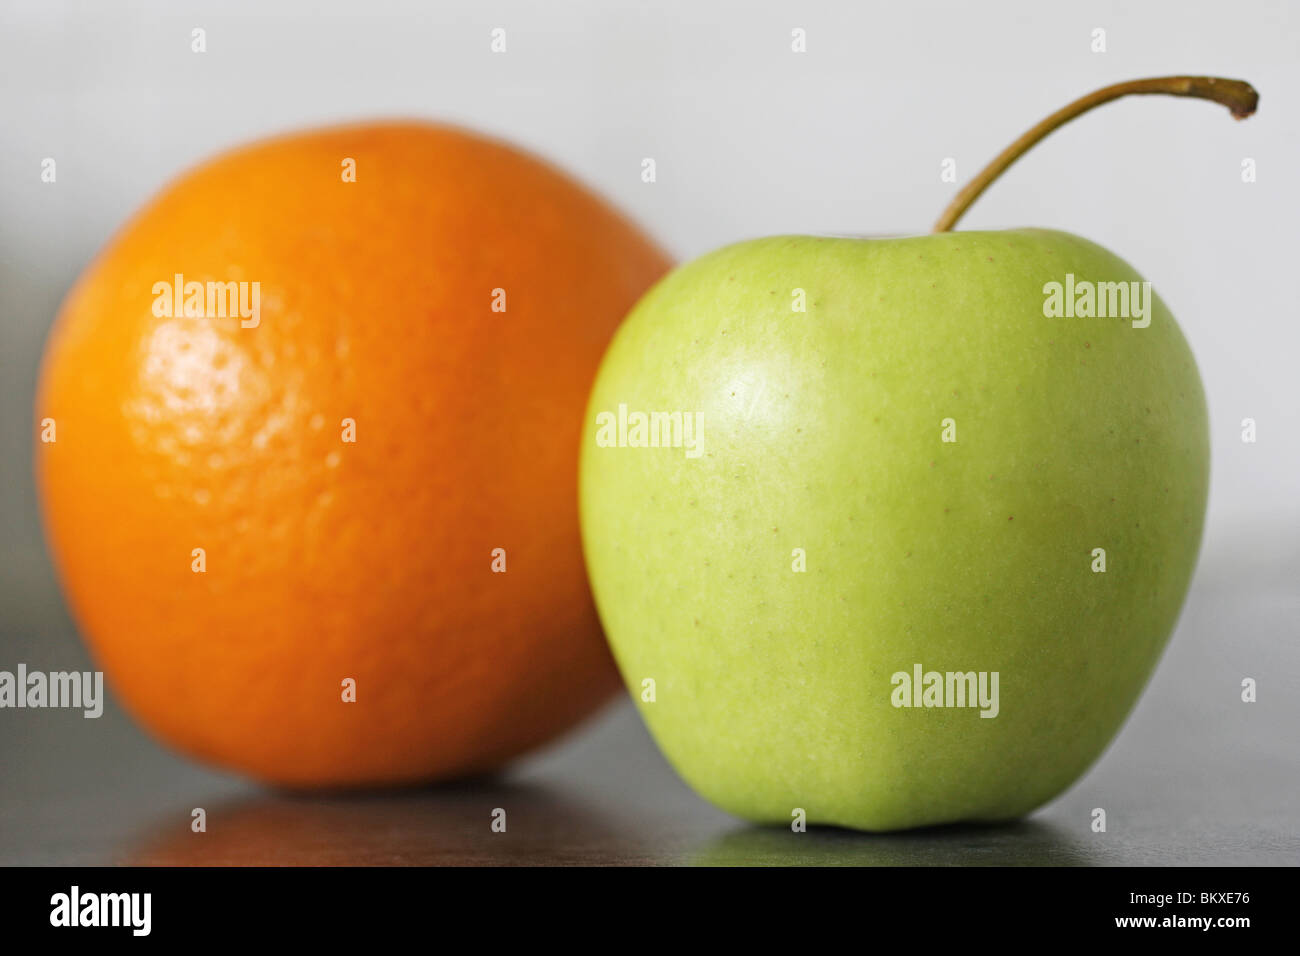 Navel orange and a golden delicious apple Stock Photo